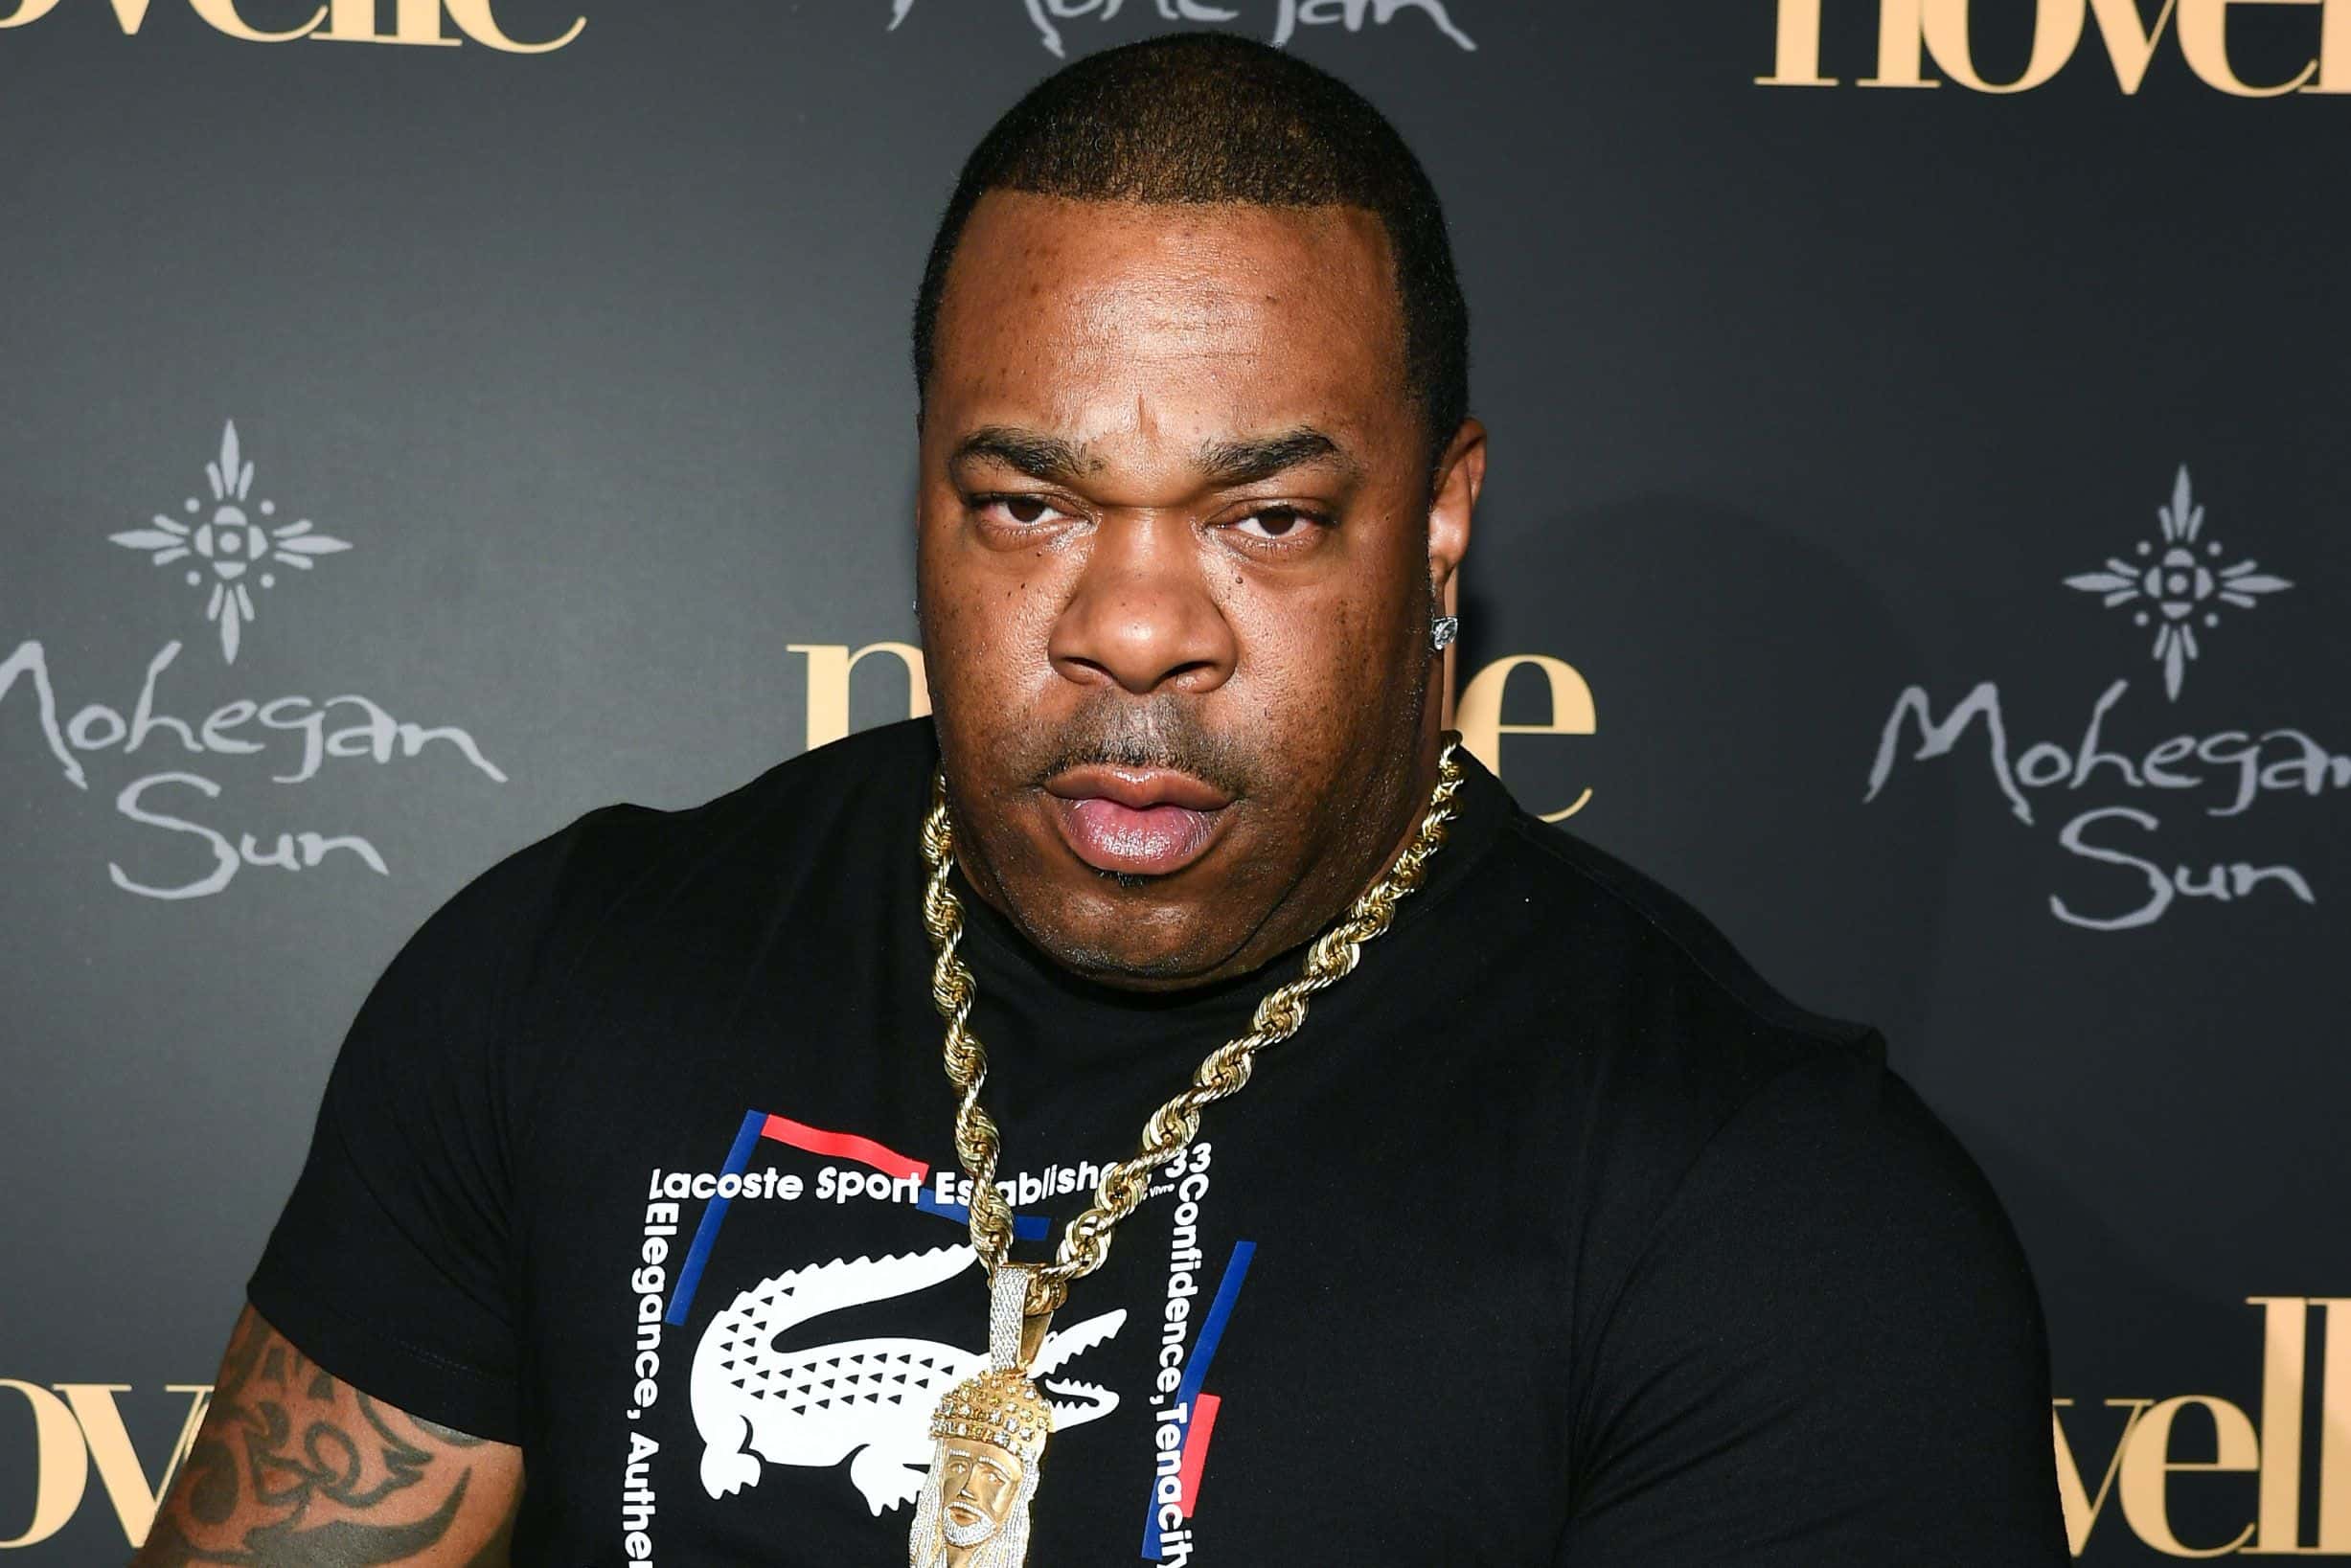 HAPPY 48TH BIRTHDAY TO 'THE DRAGON' BUSTA RHYMES! The Beat 107.3